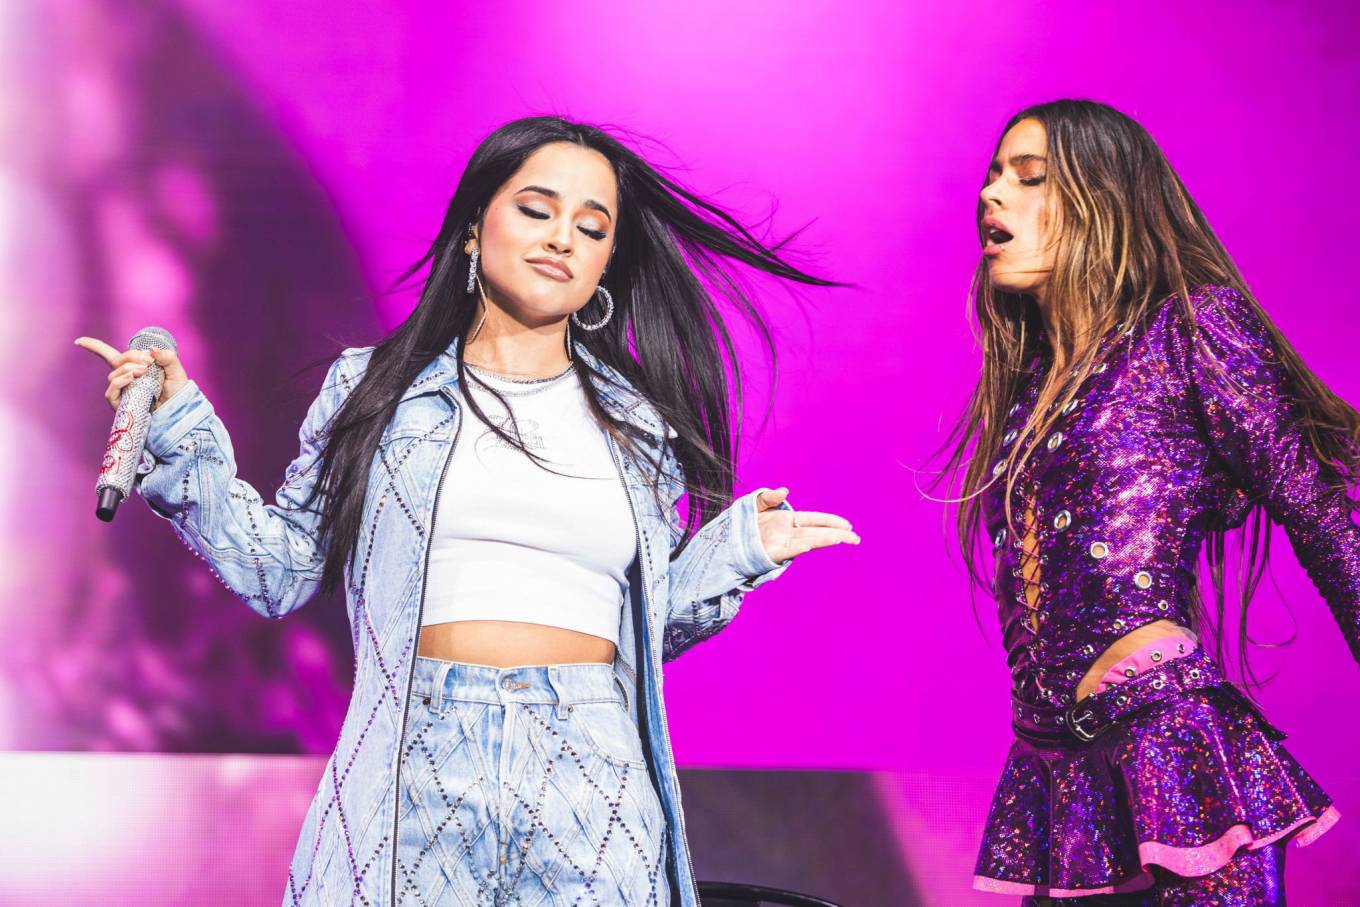 Becky G - With Tini Stoessel perform on stage at Wizink Center in Madrid